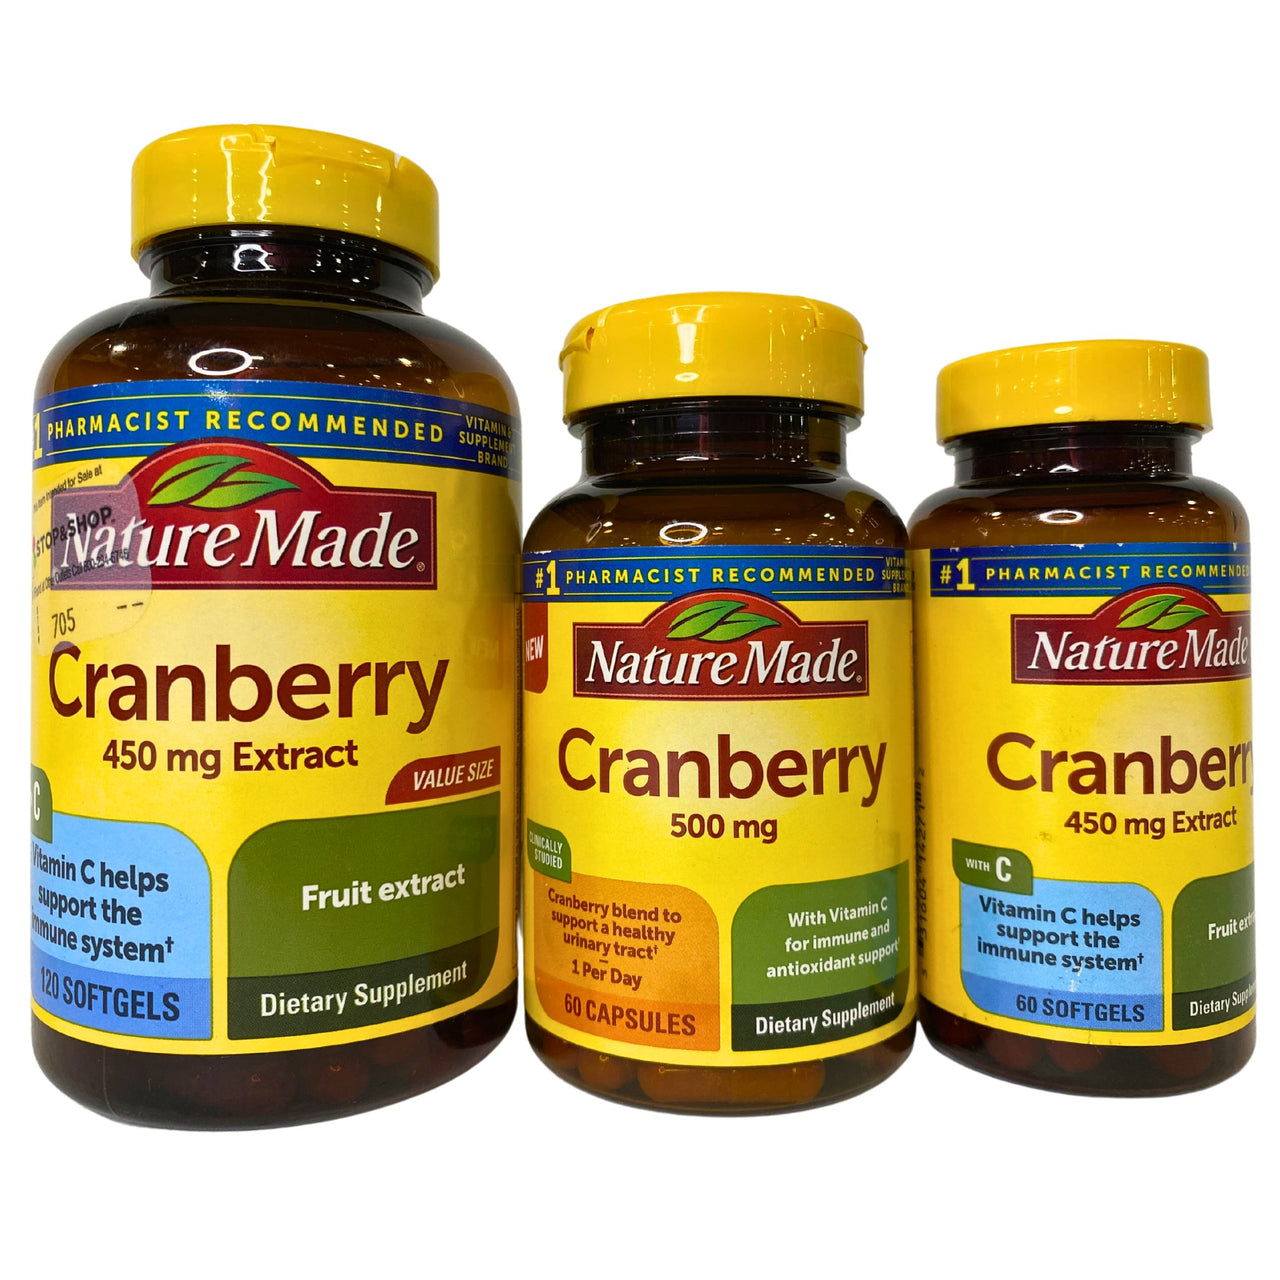 Cranberry Mix with Vitamin C Helps Support